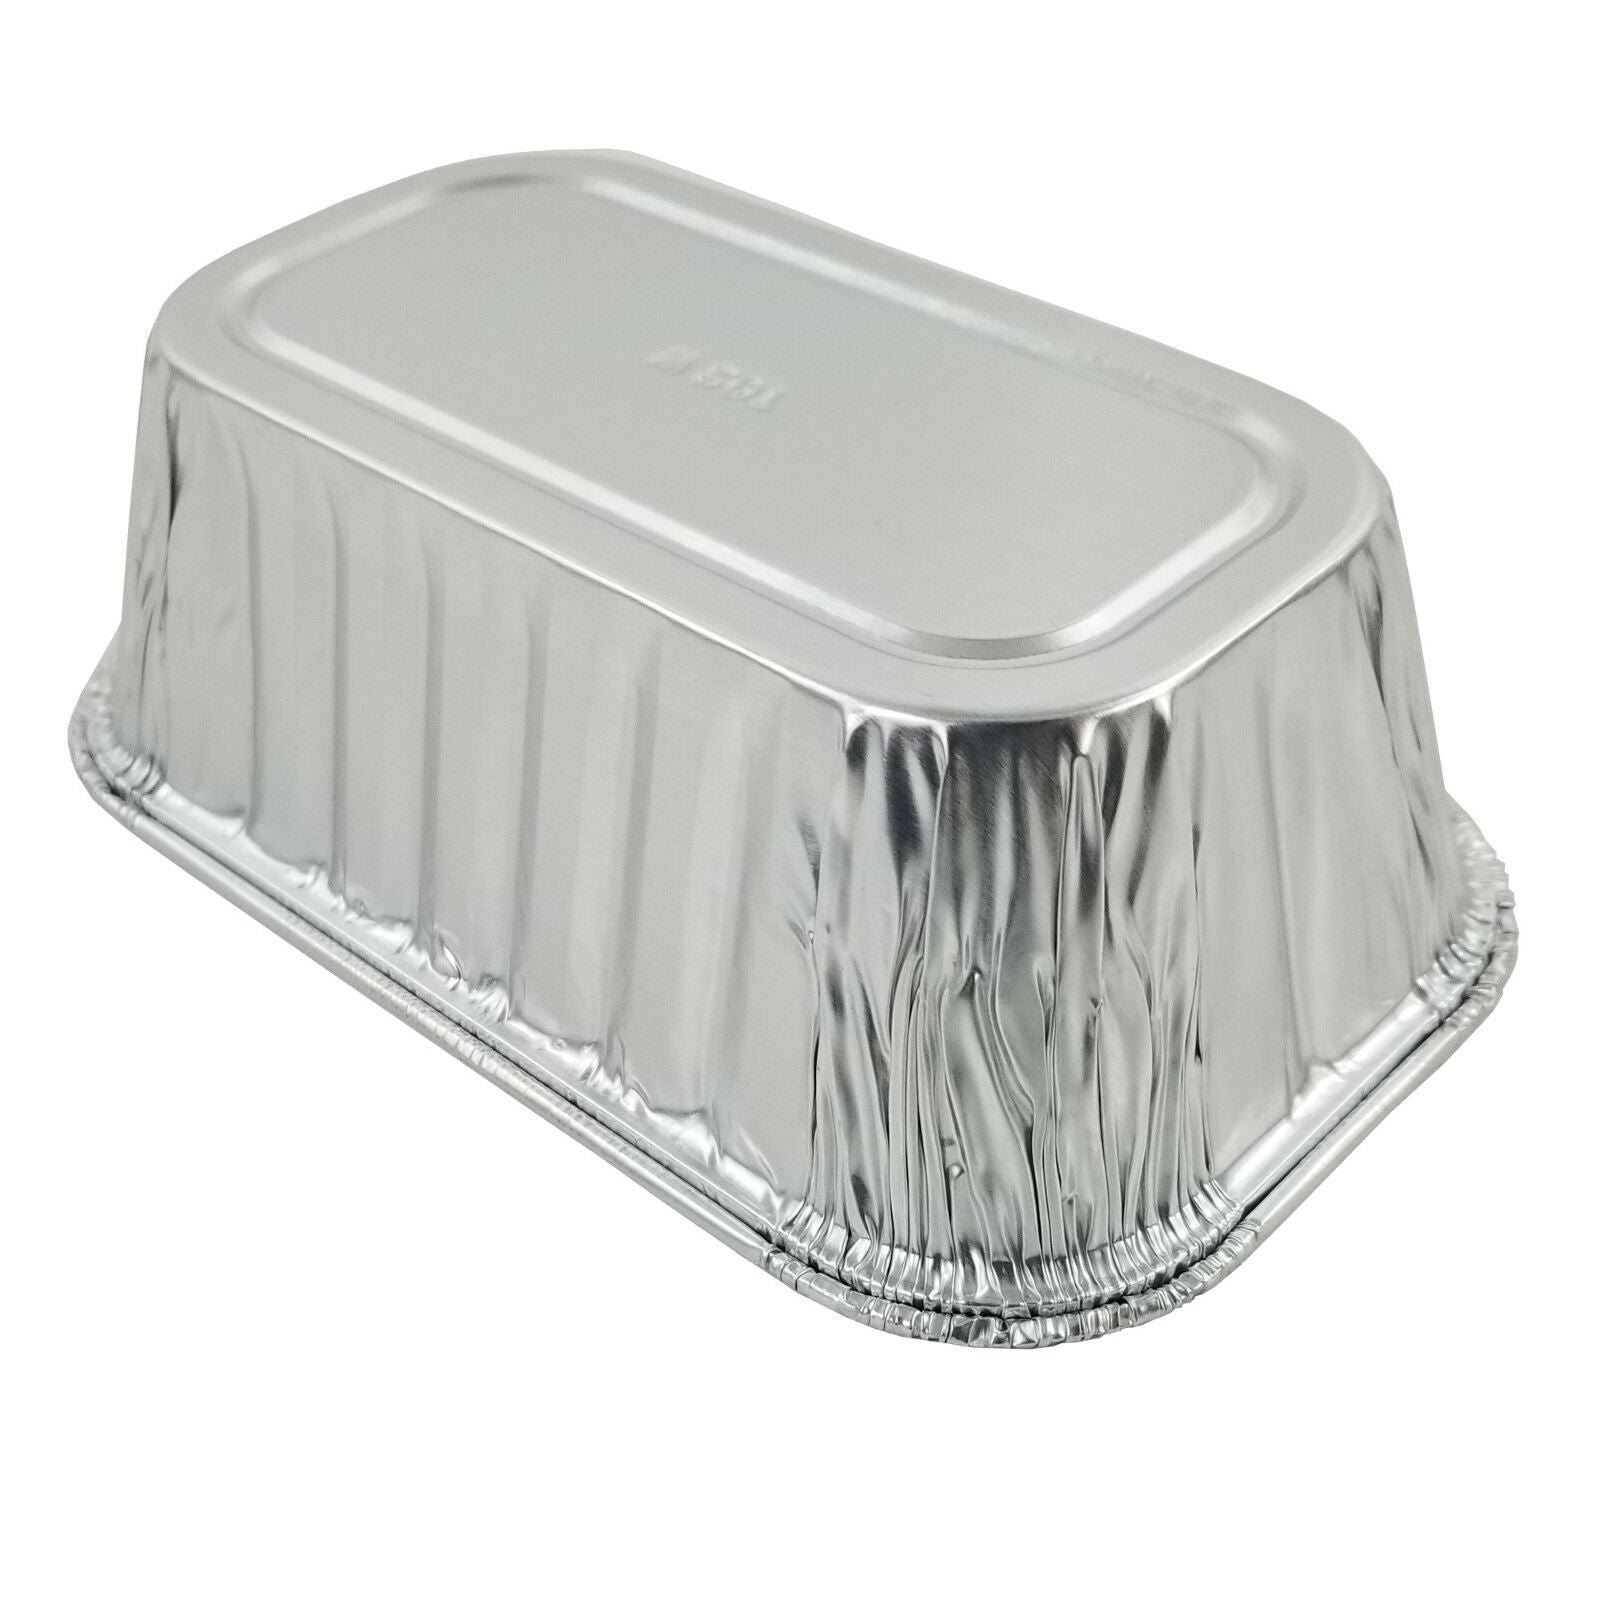 Home Plus D50050 Durable Foil 3-3/16 in. W x 5-5/8 in. L Mini Loaf Pan